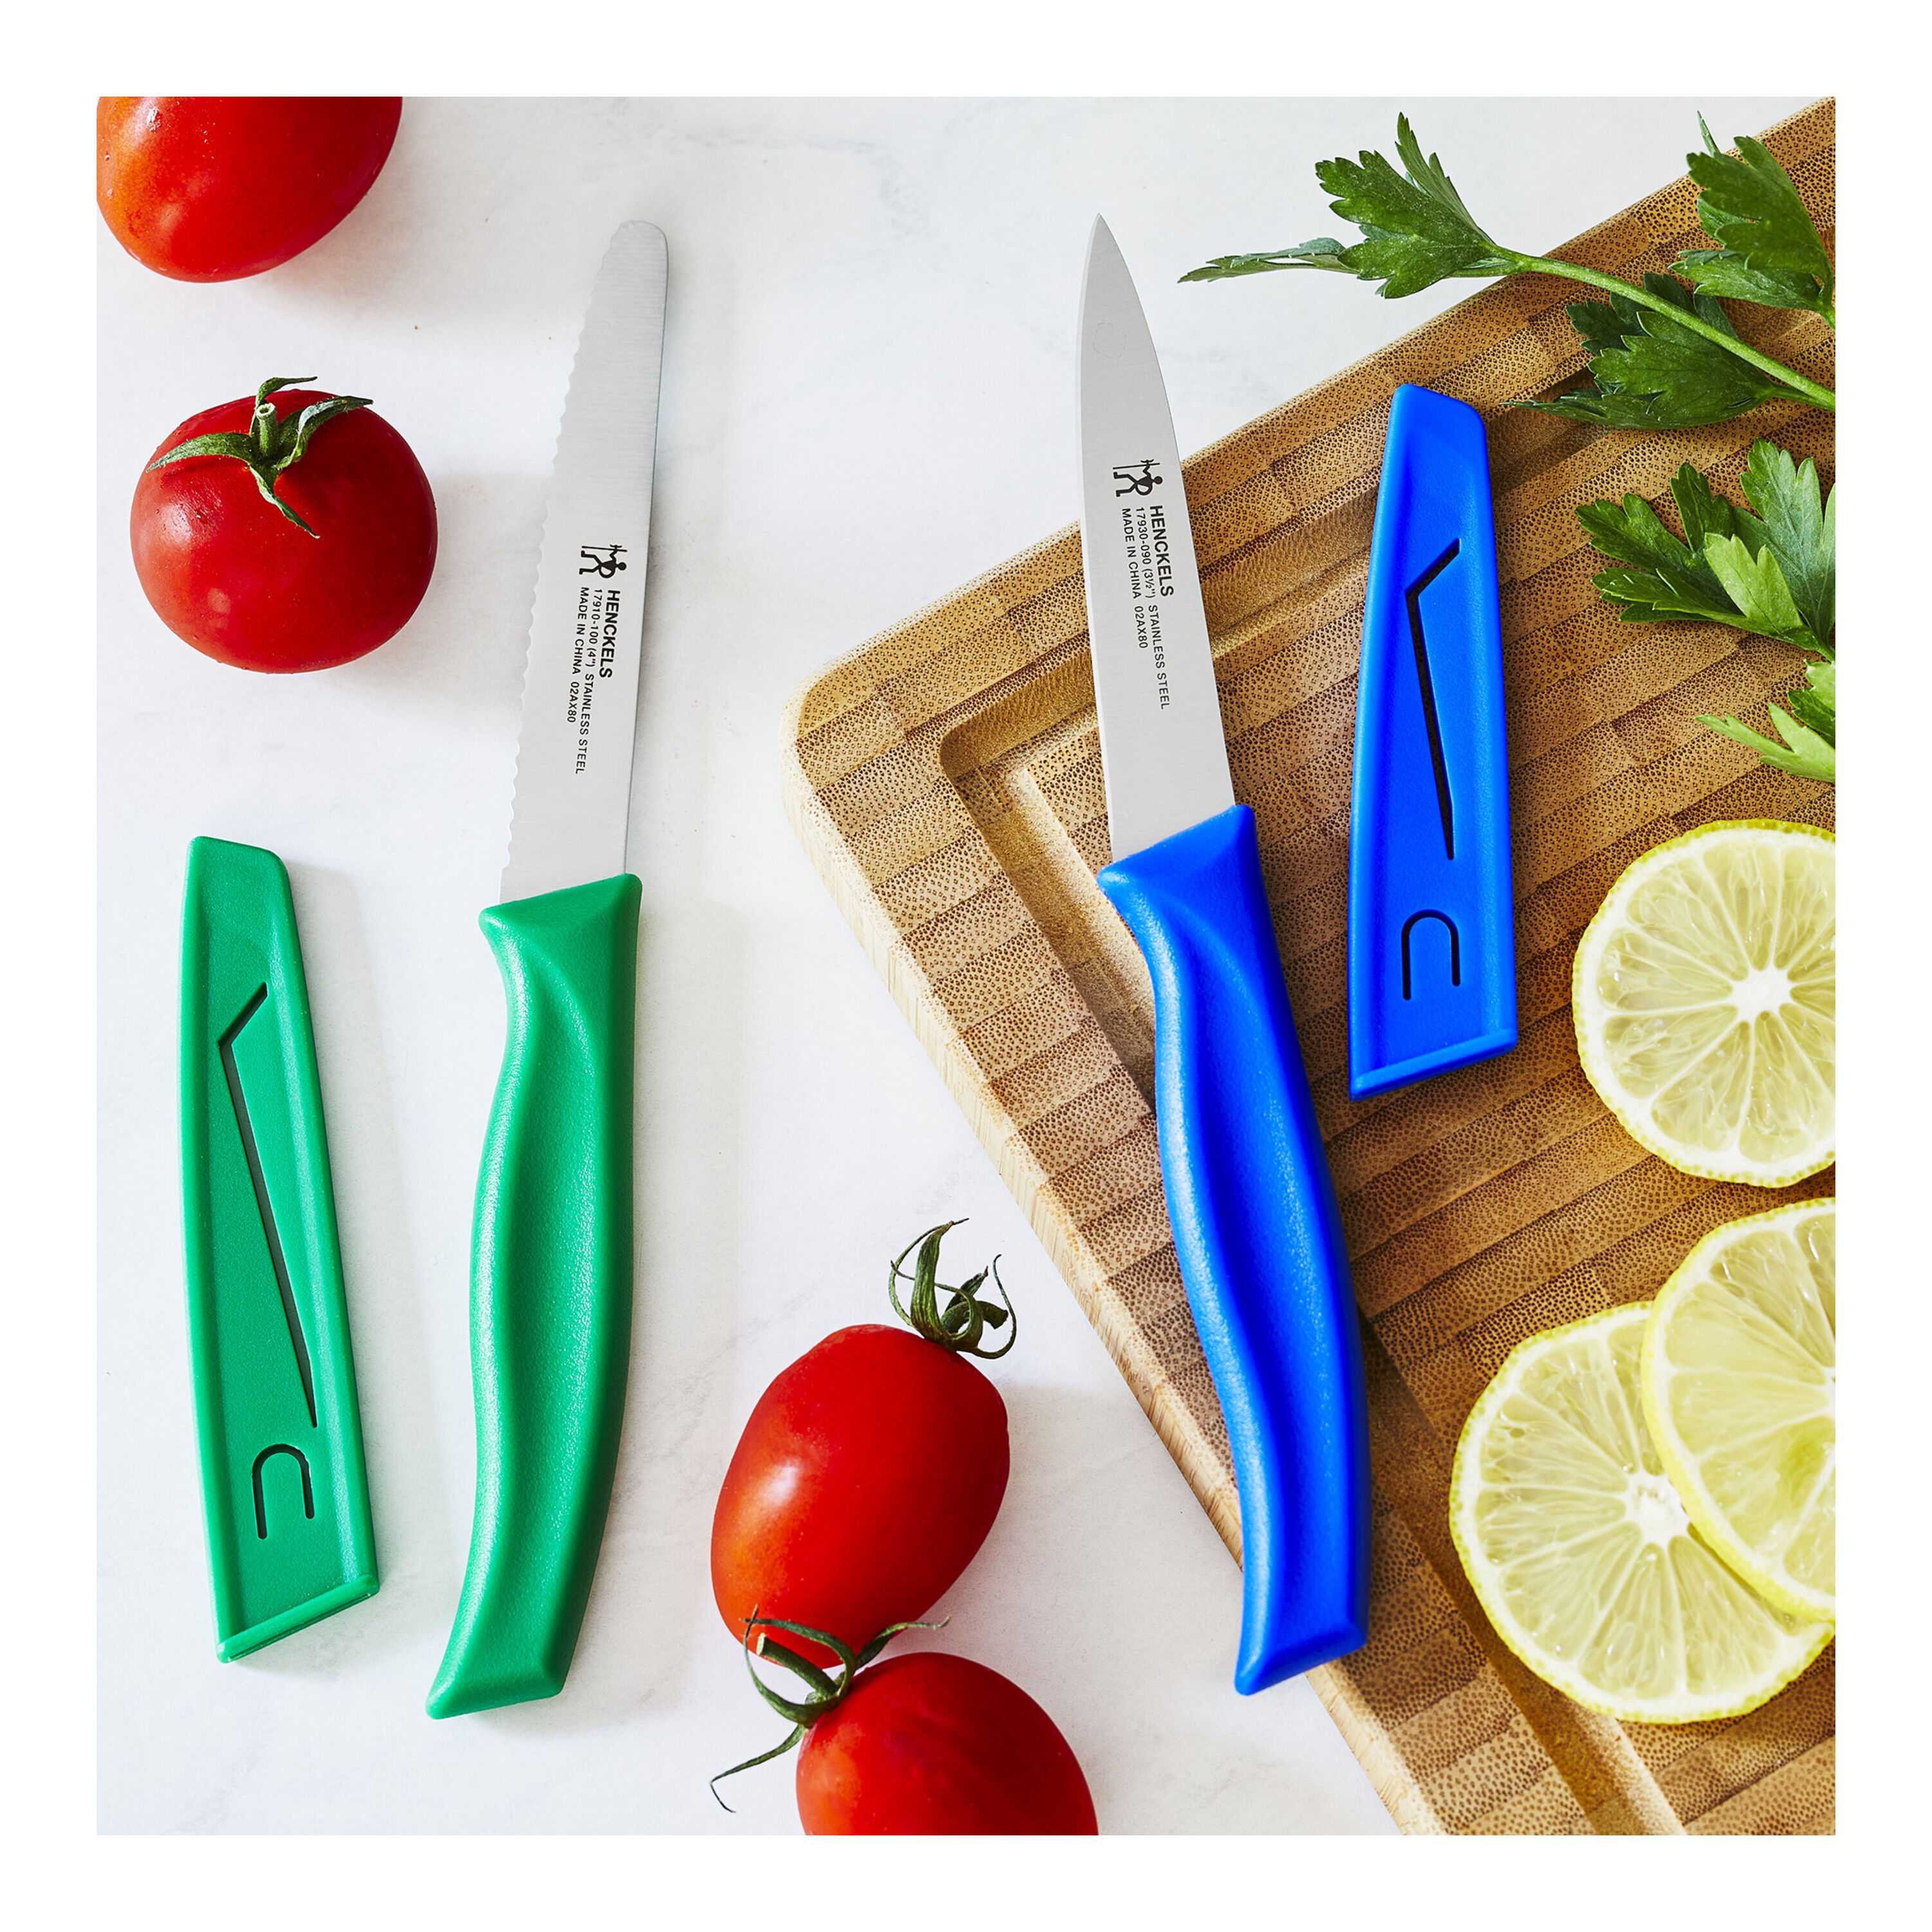 Paring Knife set of 6 PCS, 3.5 Inch Stainless Steel Fruit and Vegetable  Knives,Comfortable Handle With Multi-Color Red/Green/Blue